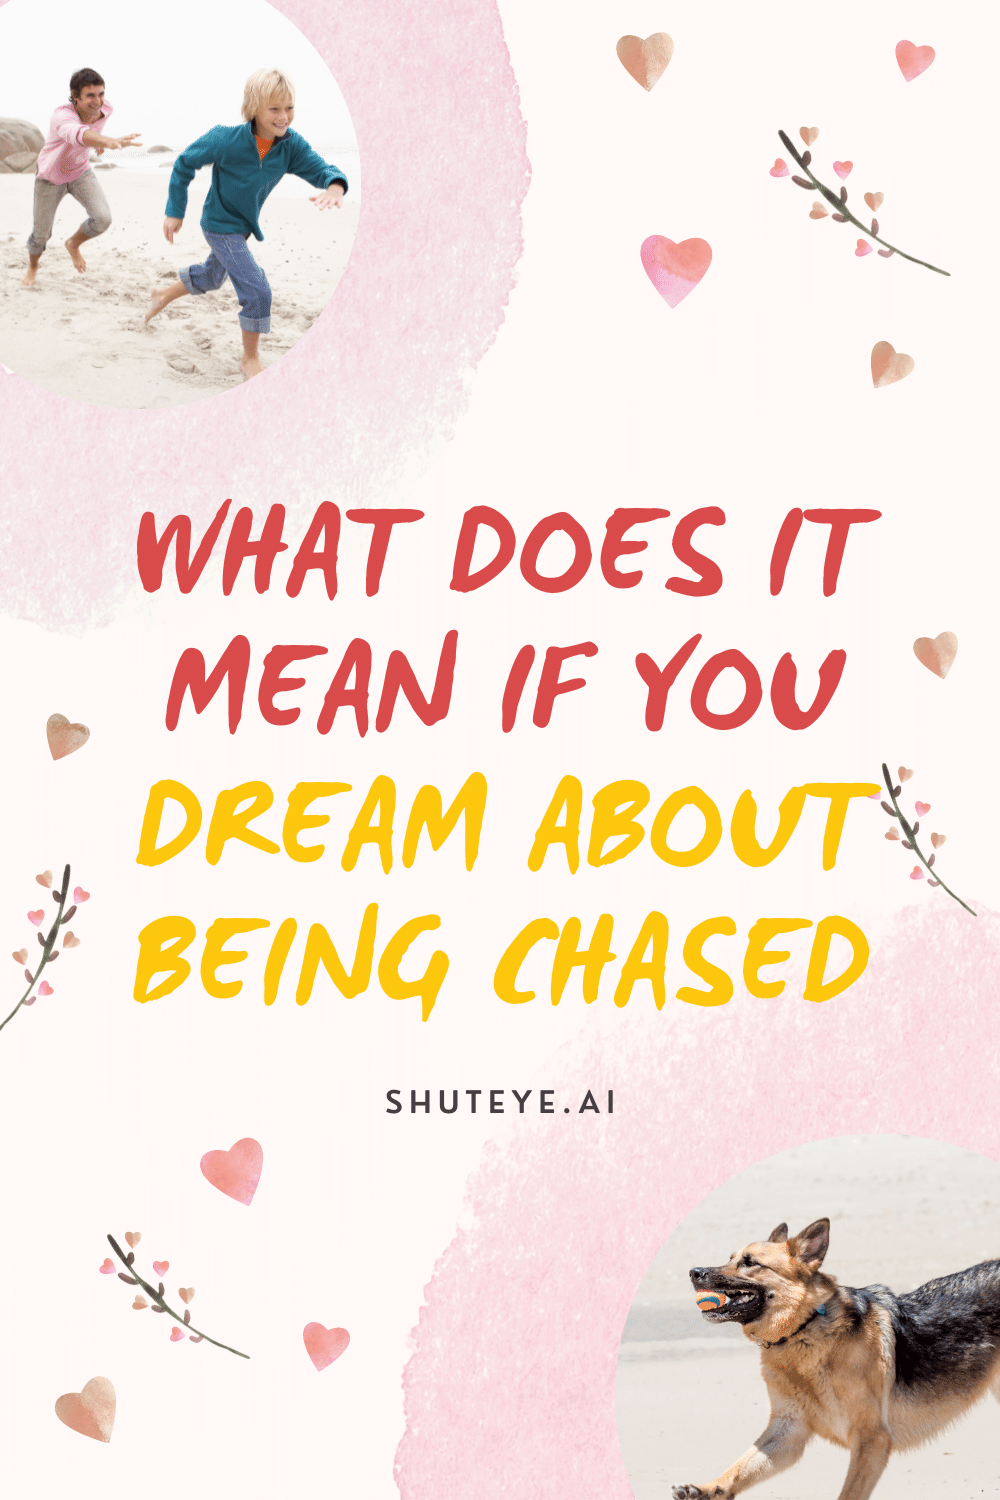 What Does it Mean if You Dream about Being Chased